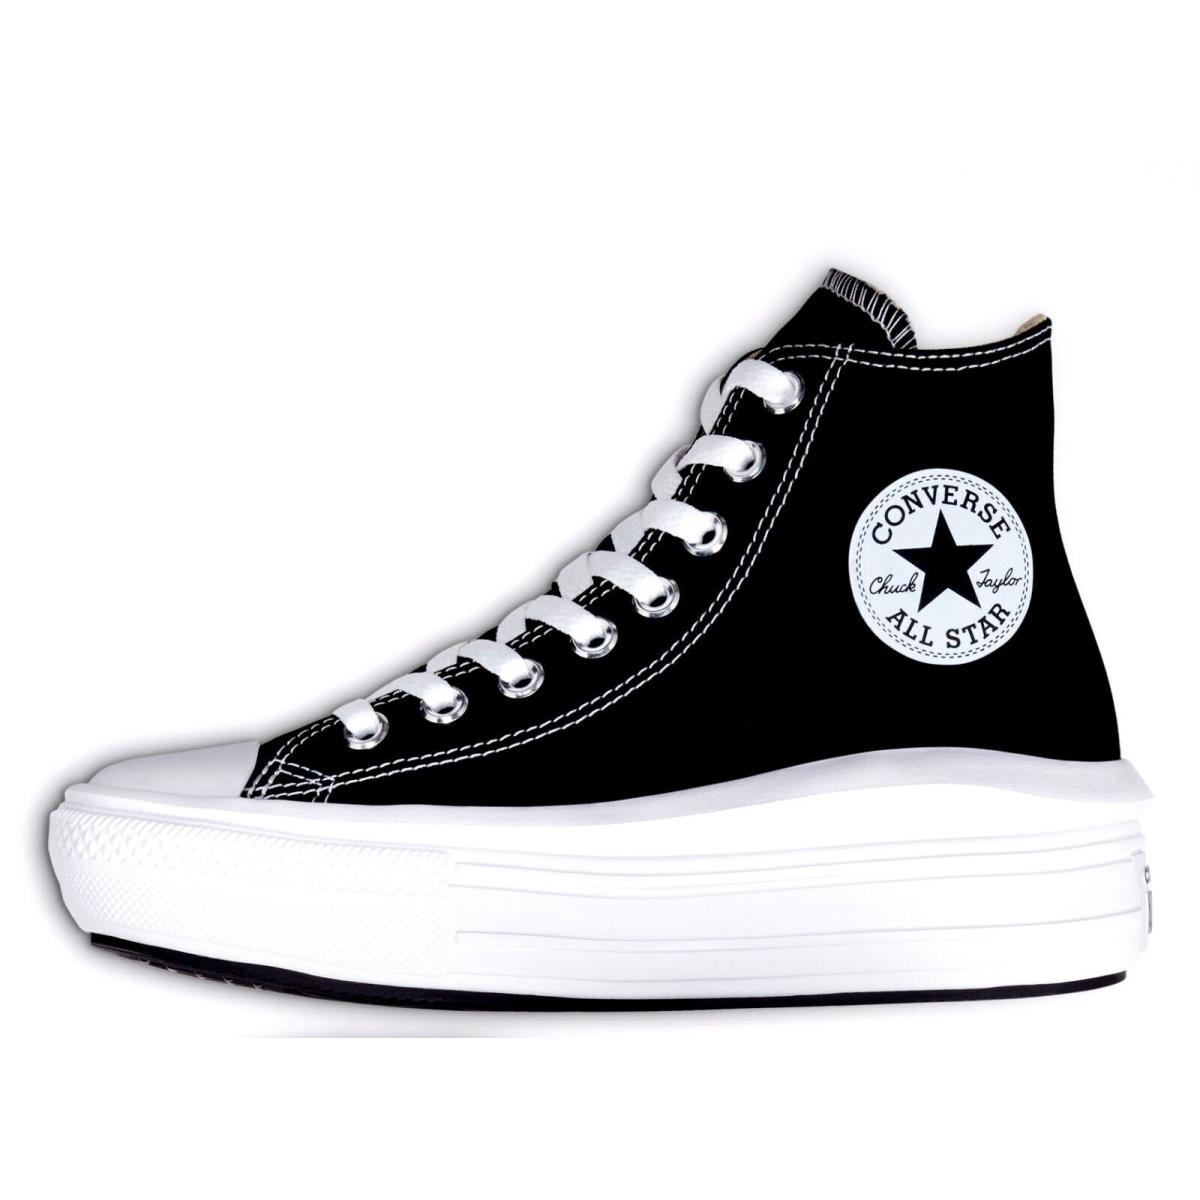 Converse Women`s Chuck Taylor All Star Move Platform Sneaker Canvas Upper Shoes Black/Natural Ivory/White